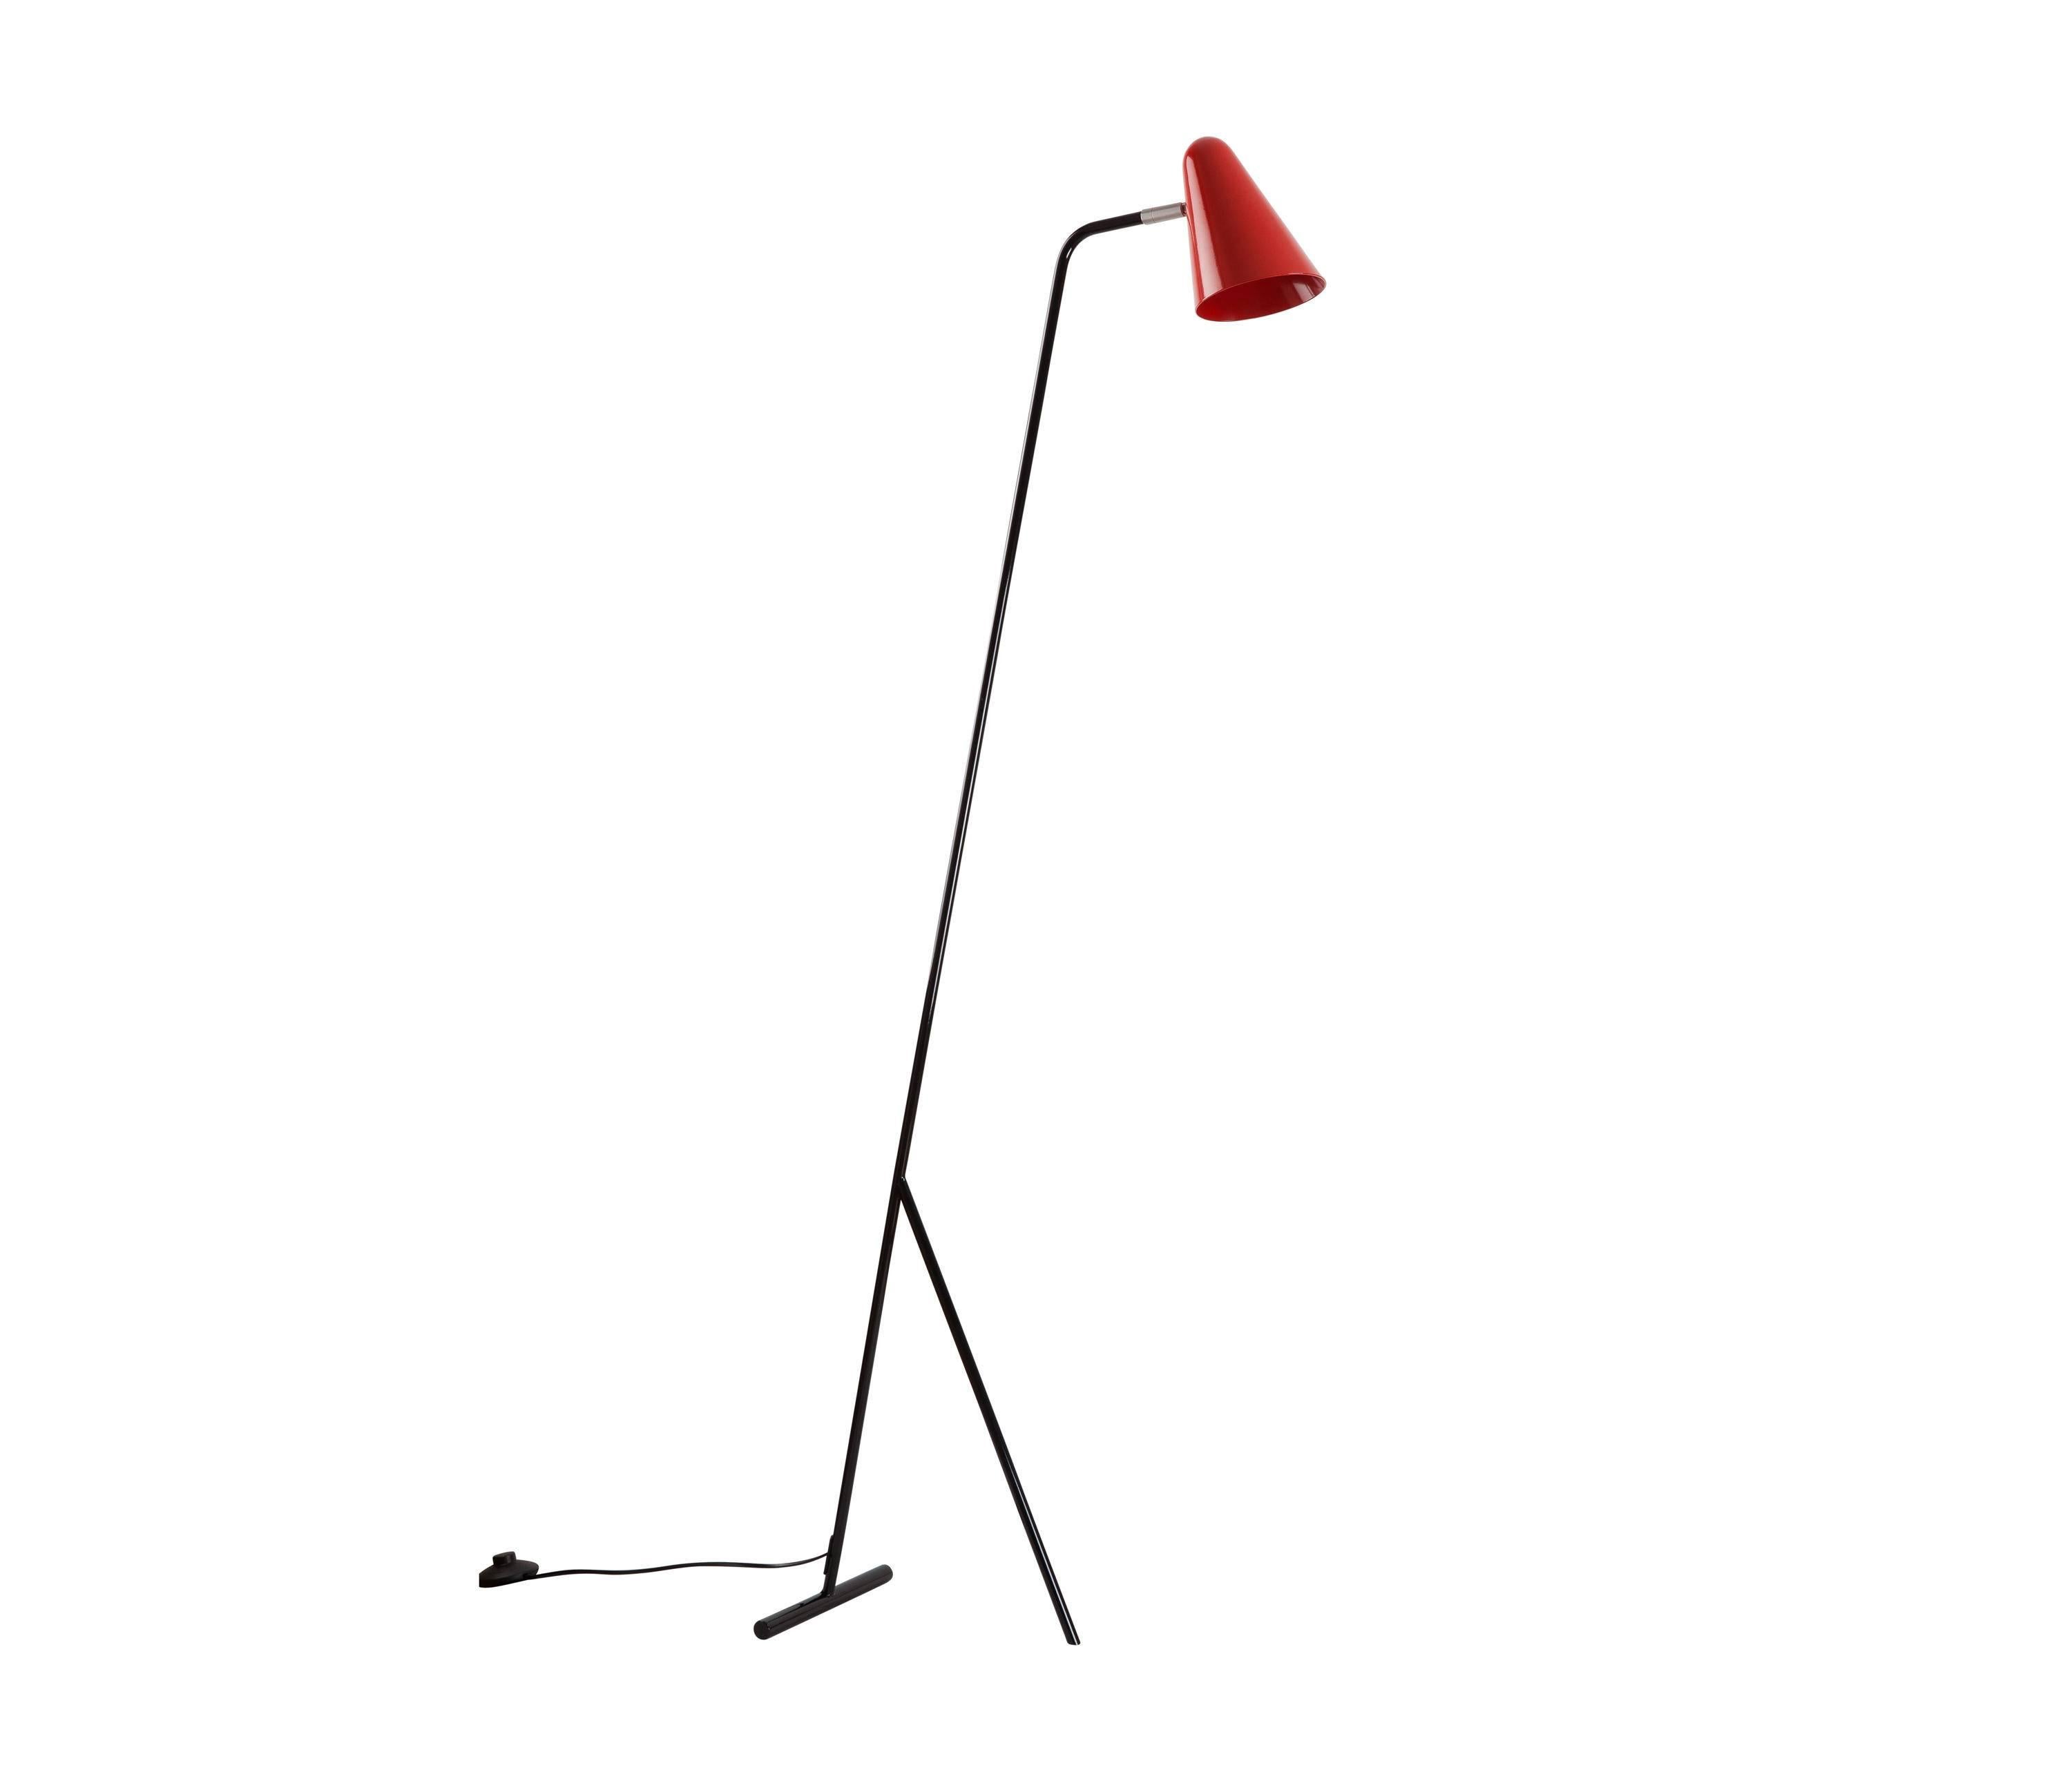 J.J.M. Hoogervorst Model #1503 'Stiletto' floor lamp for Anvia in Red. Executed in powercoated aluminium and steel with adjustable shade. Based on the original mid-1950s design, this authorized high quality re-edition is made to exacting